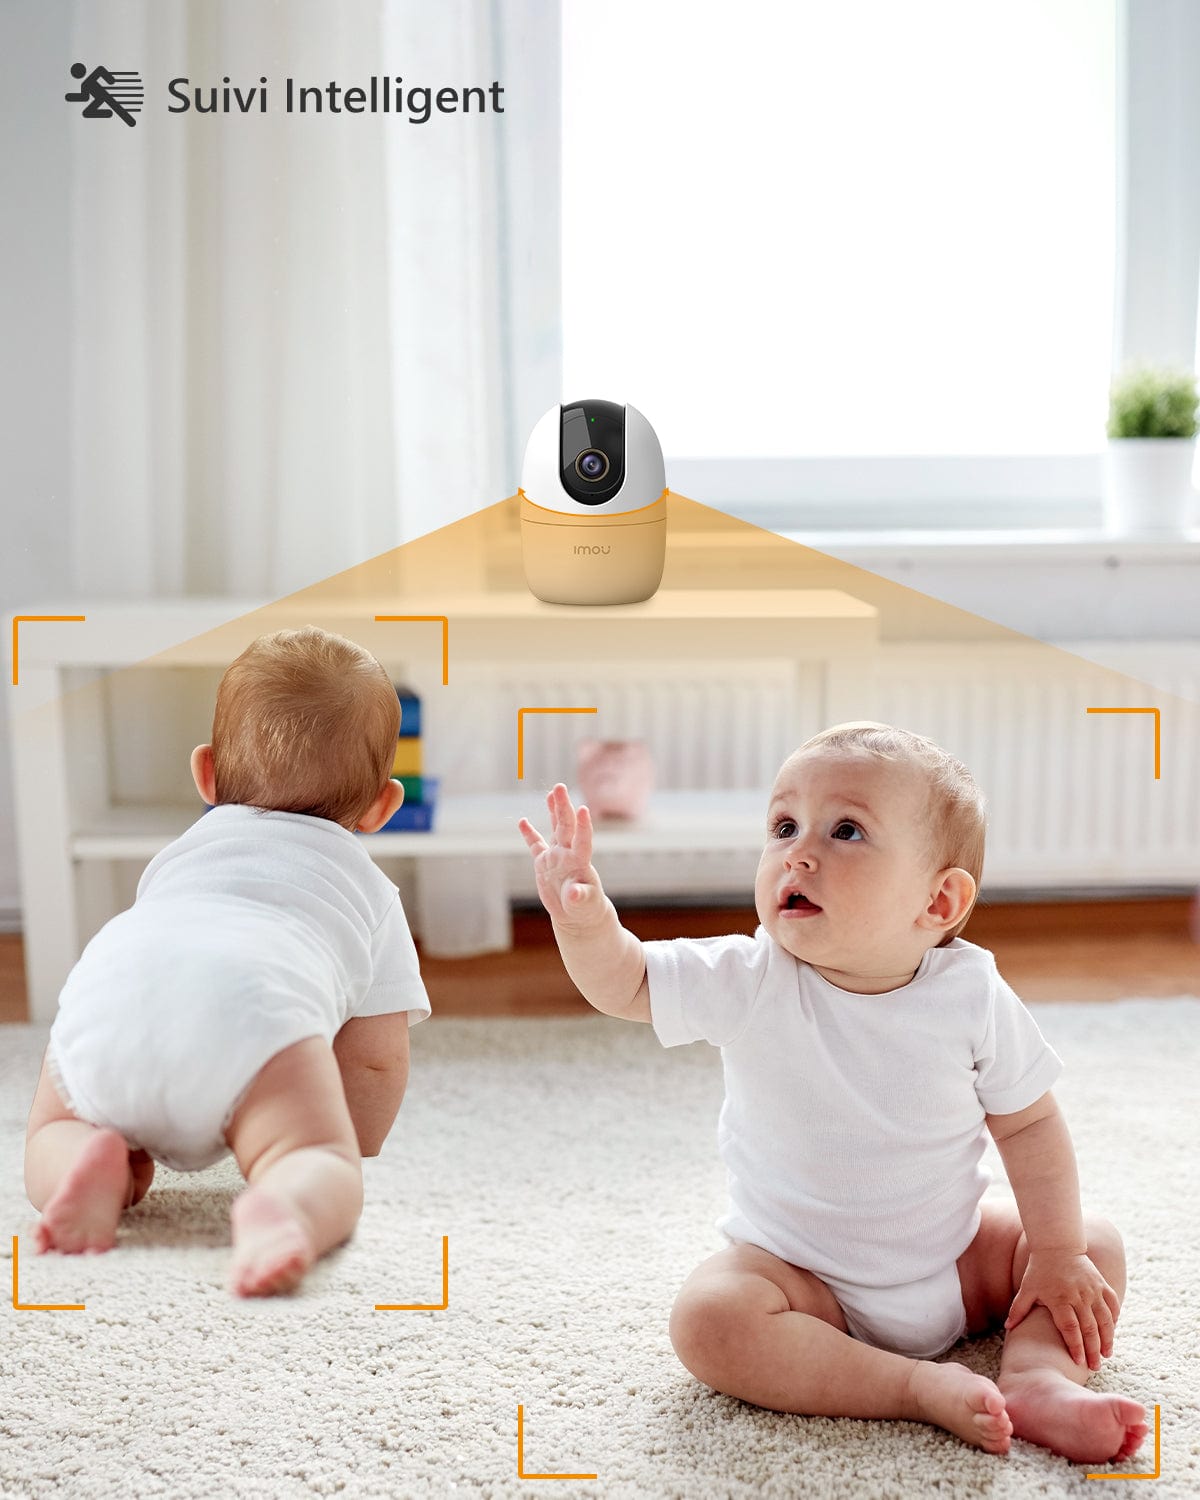 Imou Ranger 2c 2mp/4mp Home Wifi 360 Camera Human Detection Night Vision  Baby Security Surveillance Wireless Ip Camera